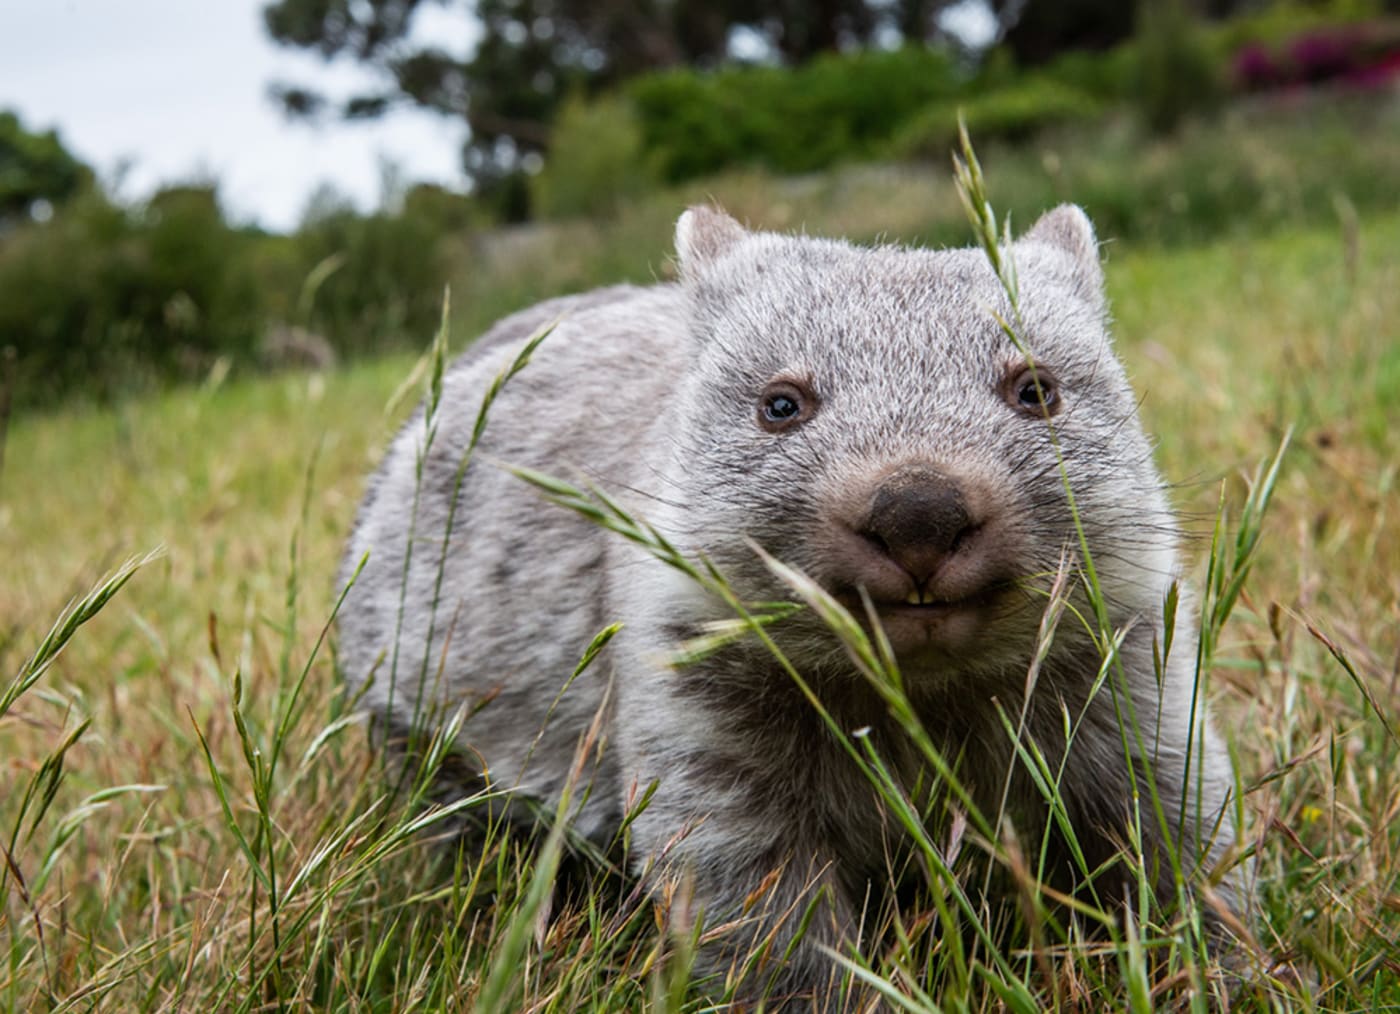 Wombats will play a key role in the rewilding of lungtalanana